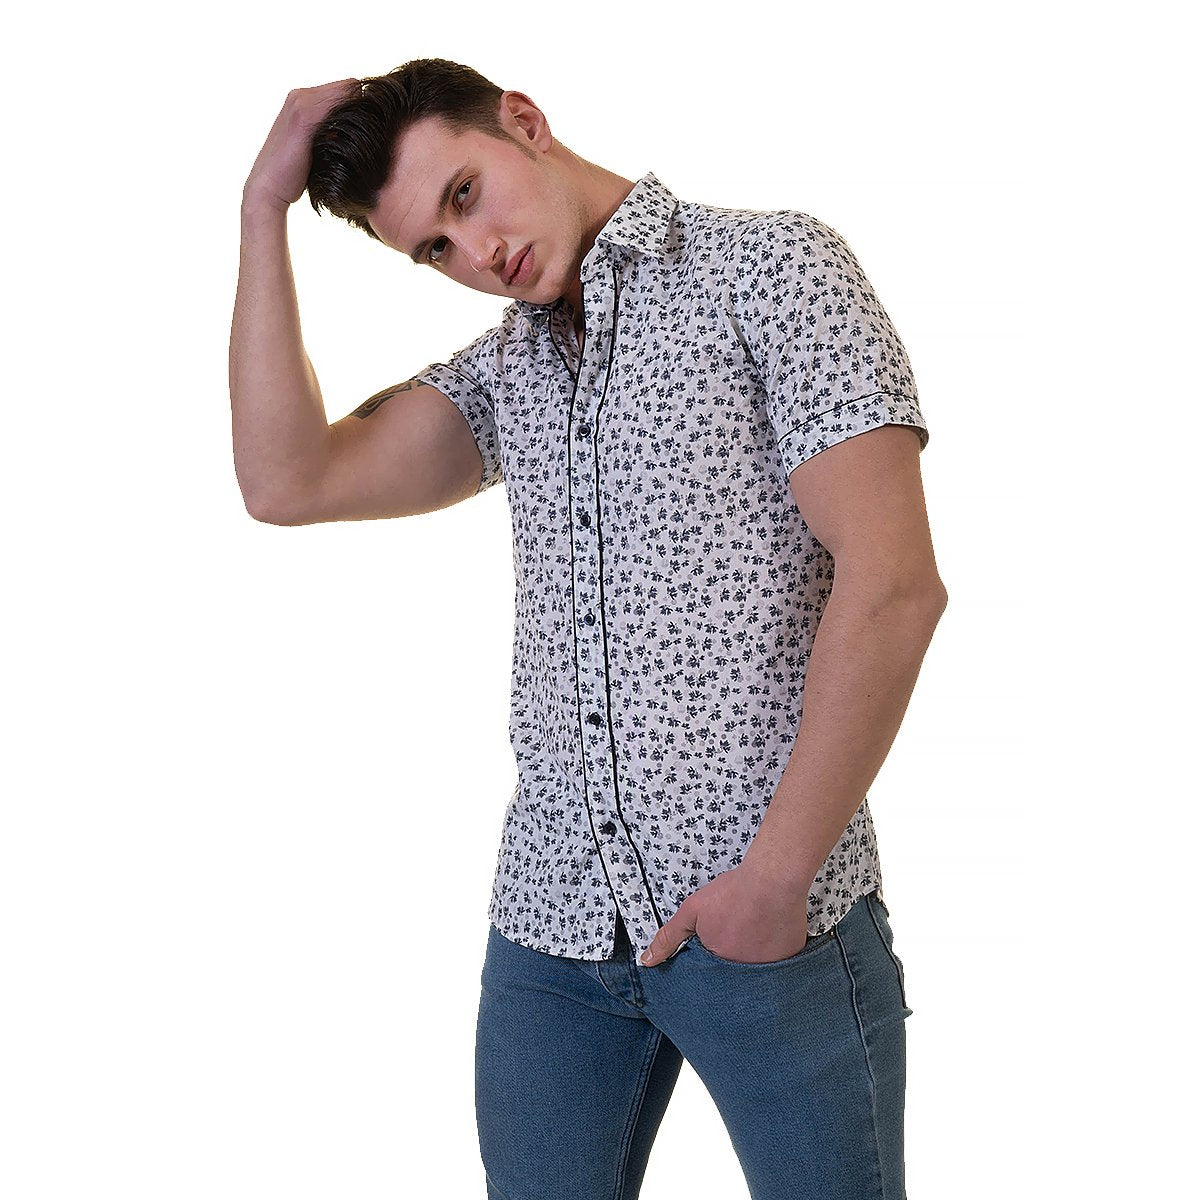 Picture of a Premium Men's Short Sleeve Button Up Shirt in White Print side view